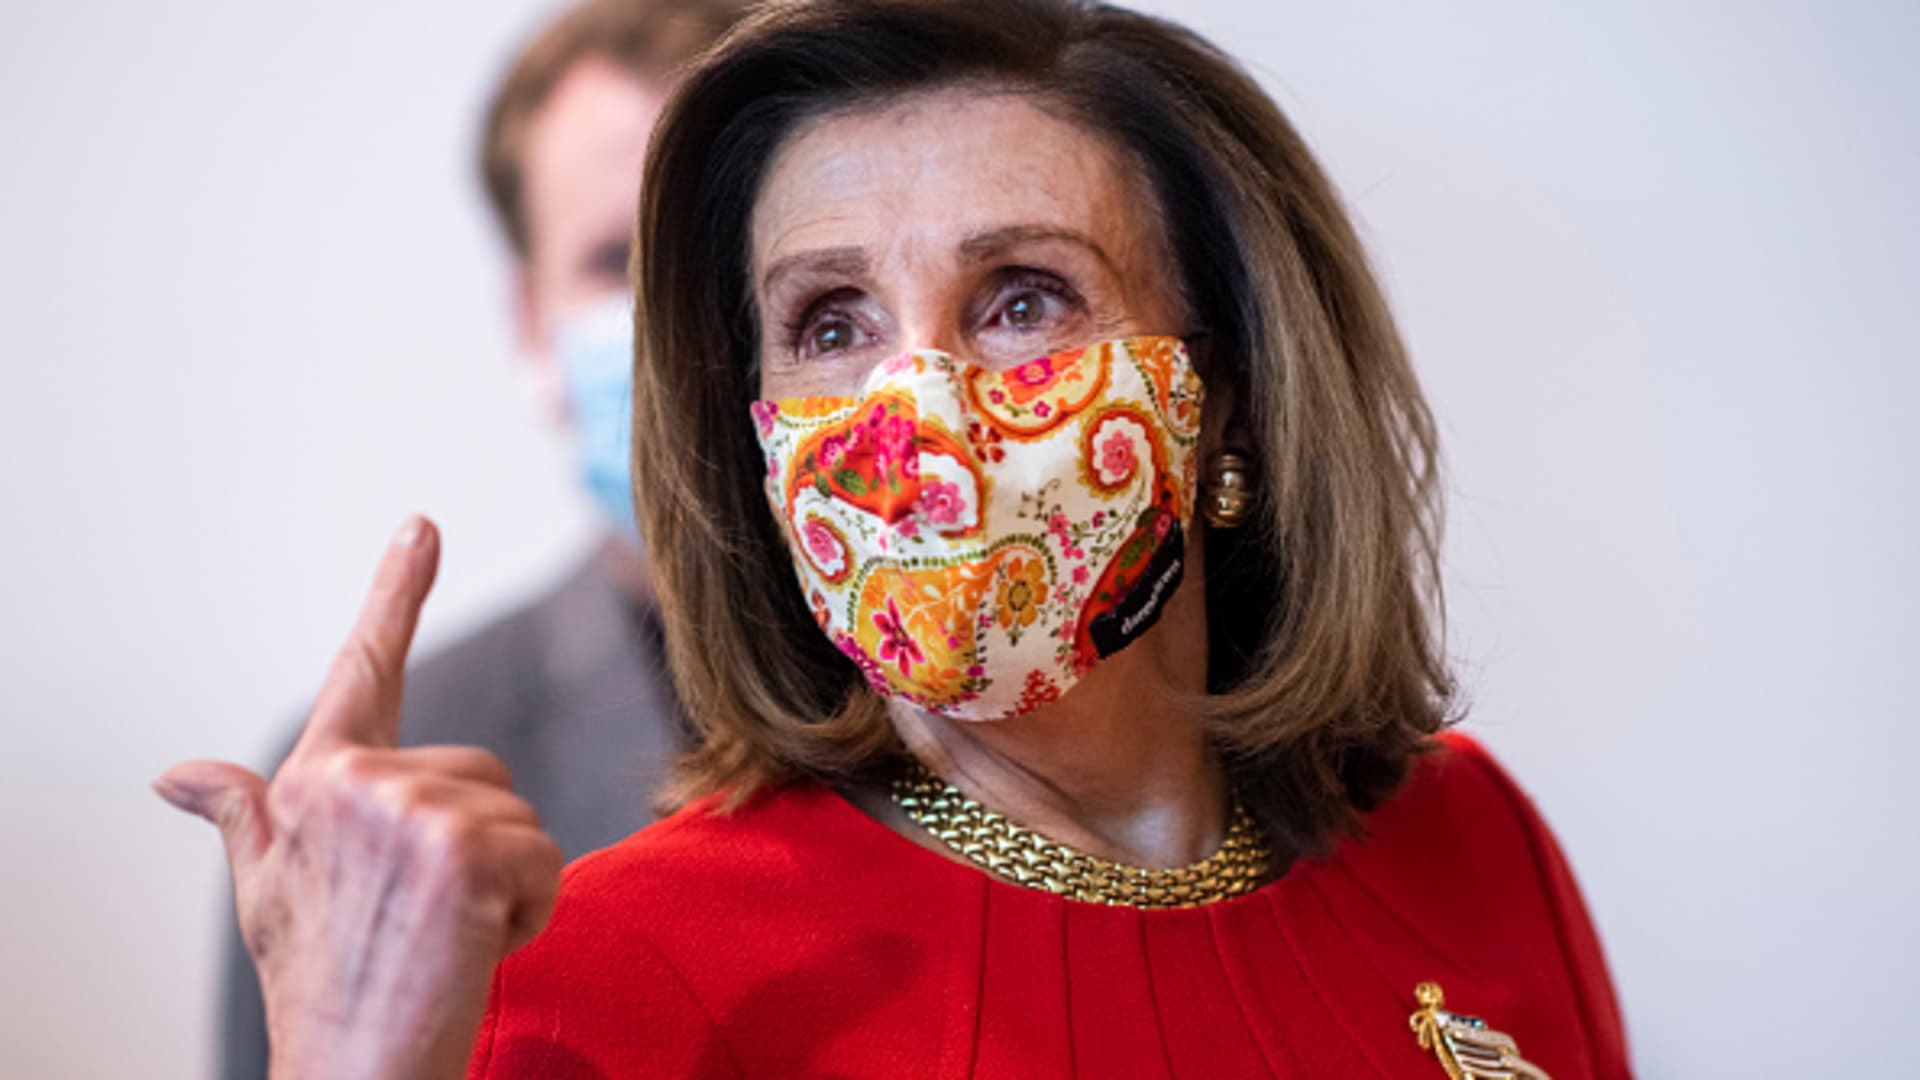 Speaker Nancy Pelosi, D-Calif., is seen after her weekly news conference in the Capitol Visitor Center on Thursday, February 11, 2021.